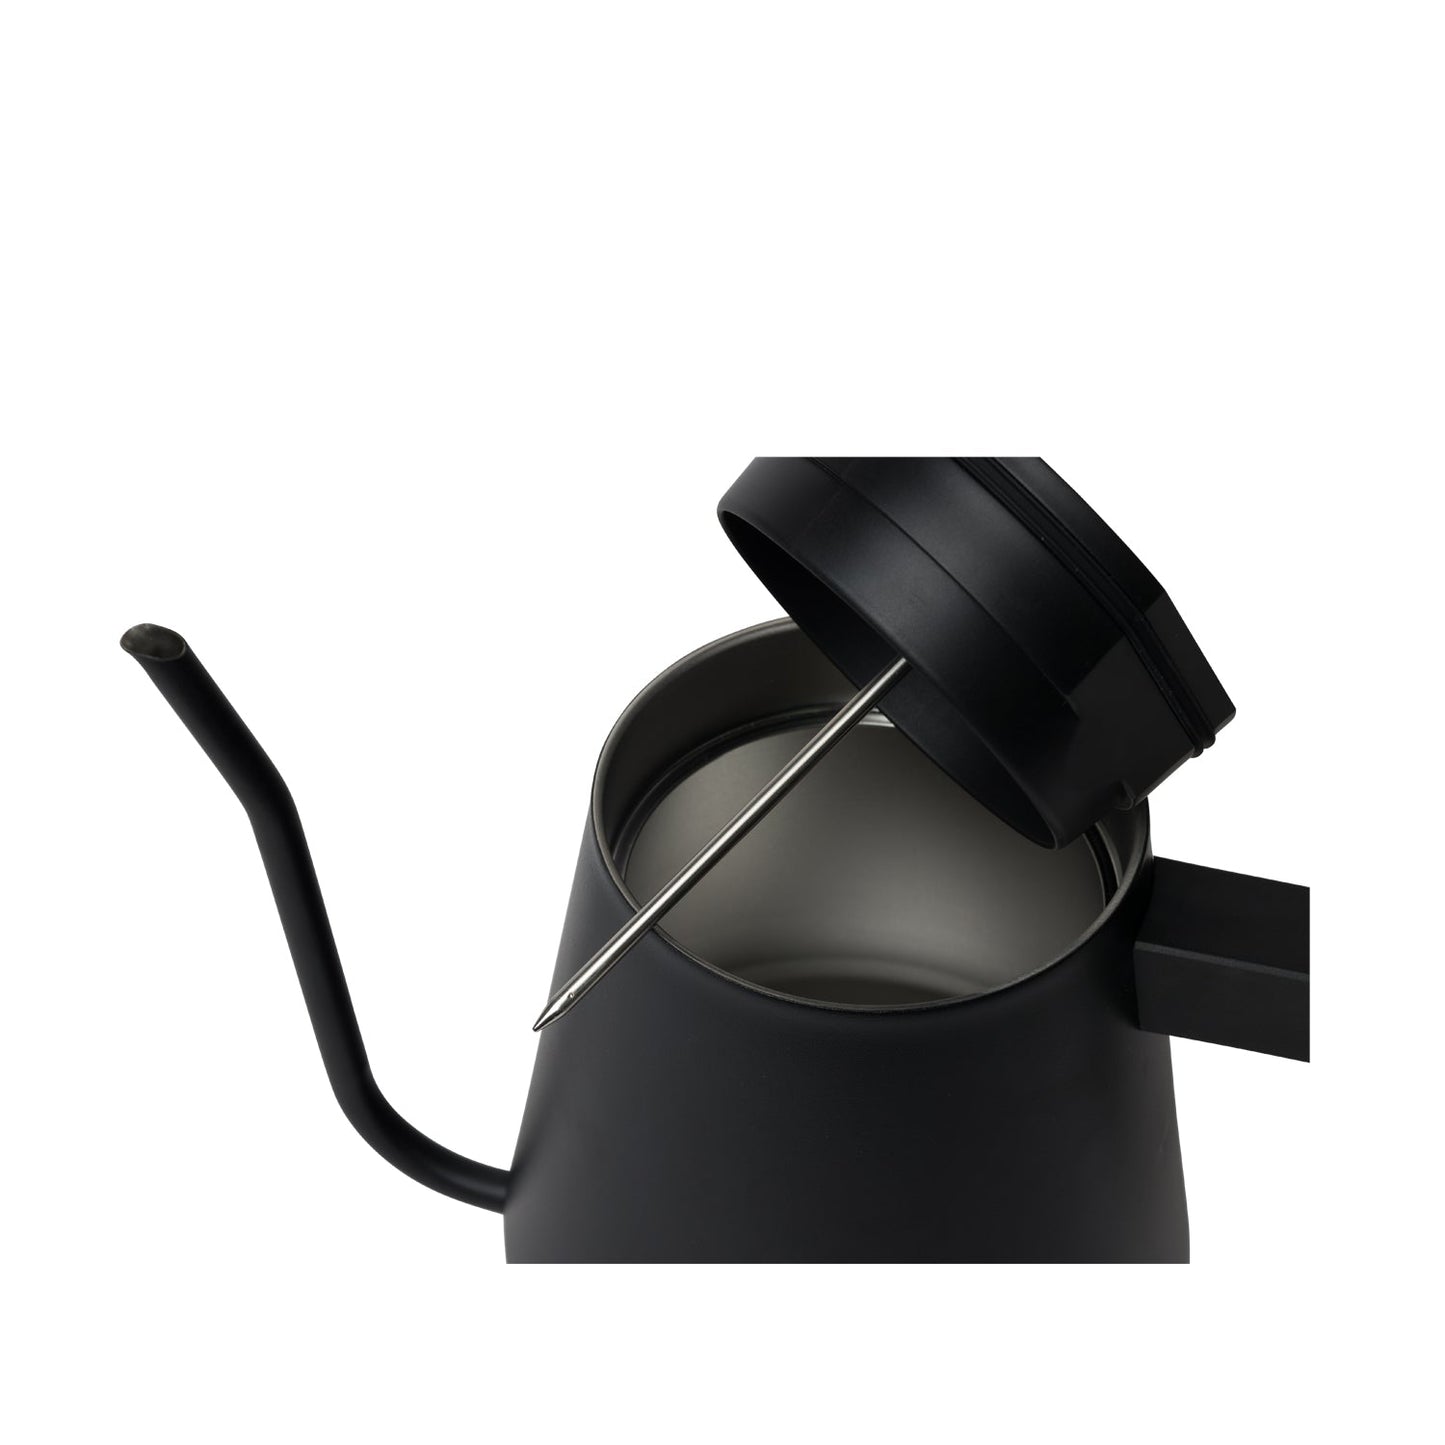 New Standard Pour-over Kettle